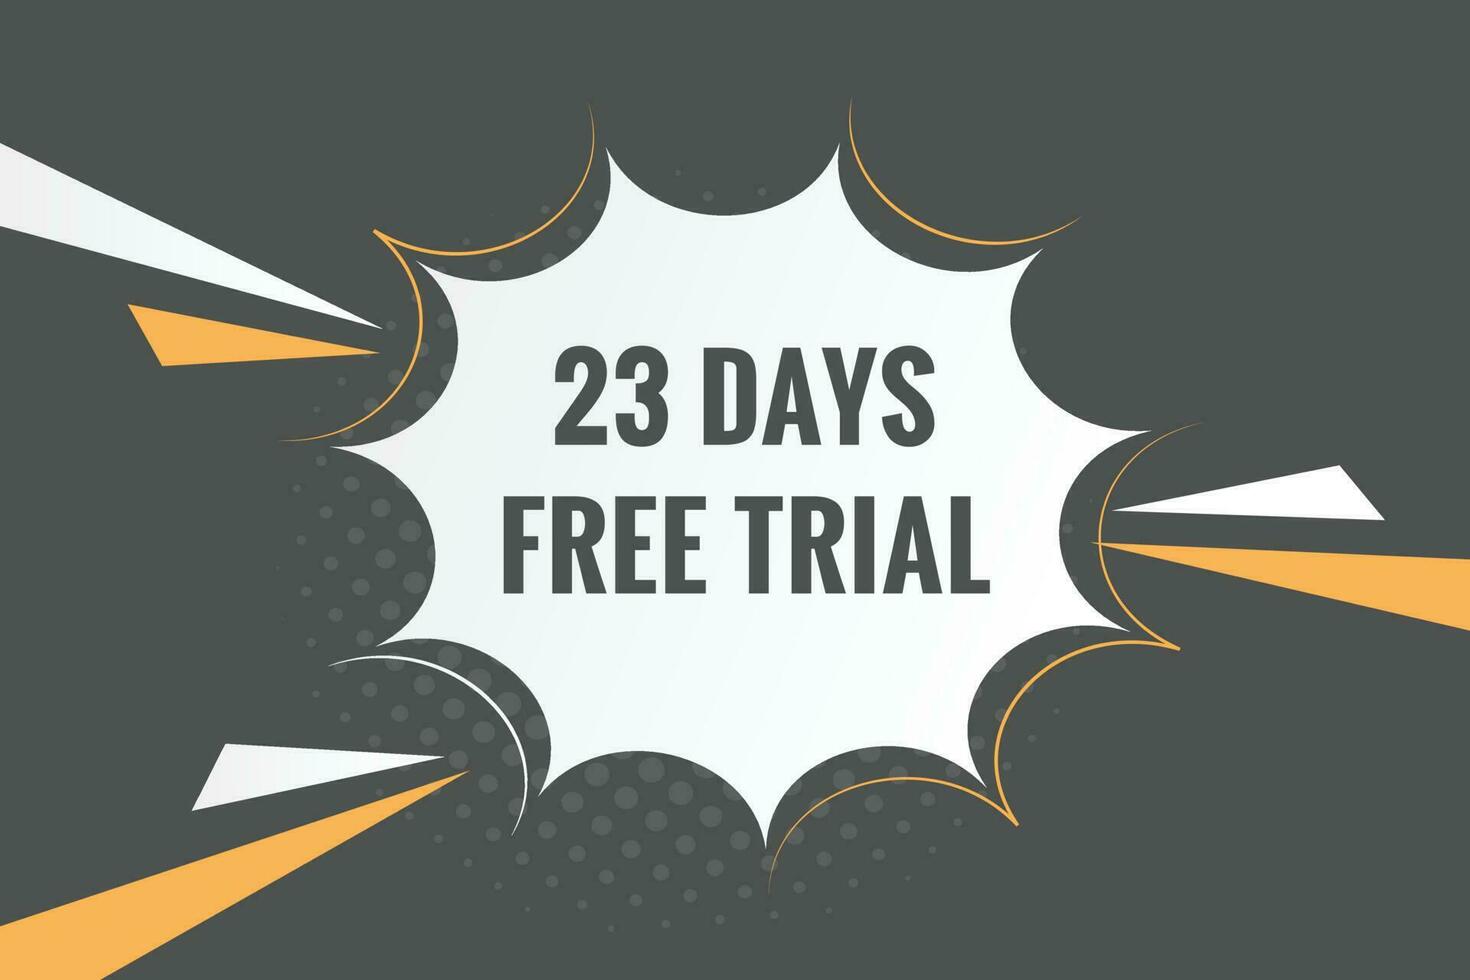 23 days Free trial Banner Design. 23 day free banner background vector